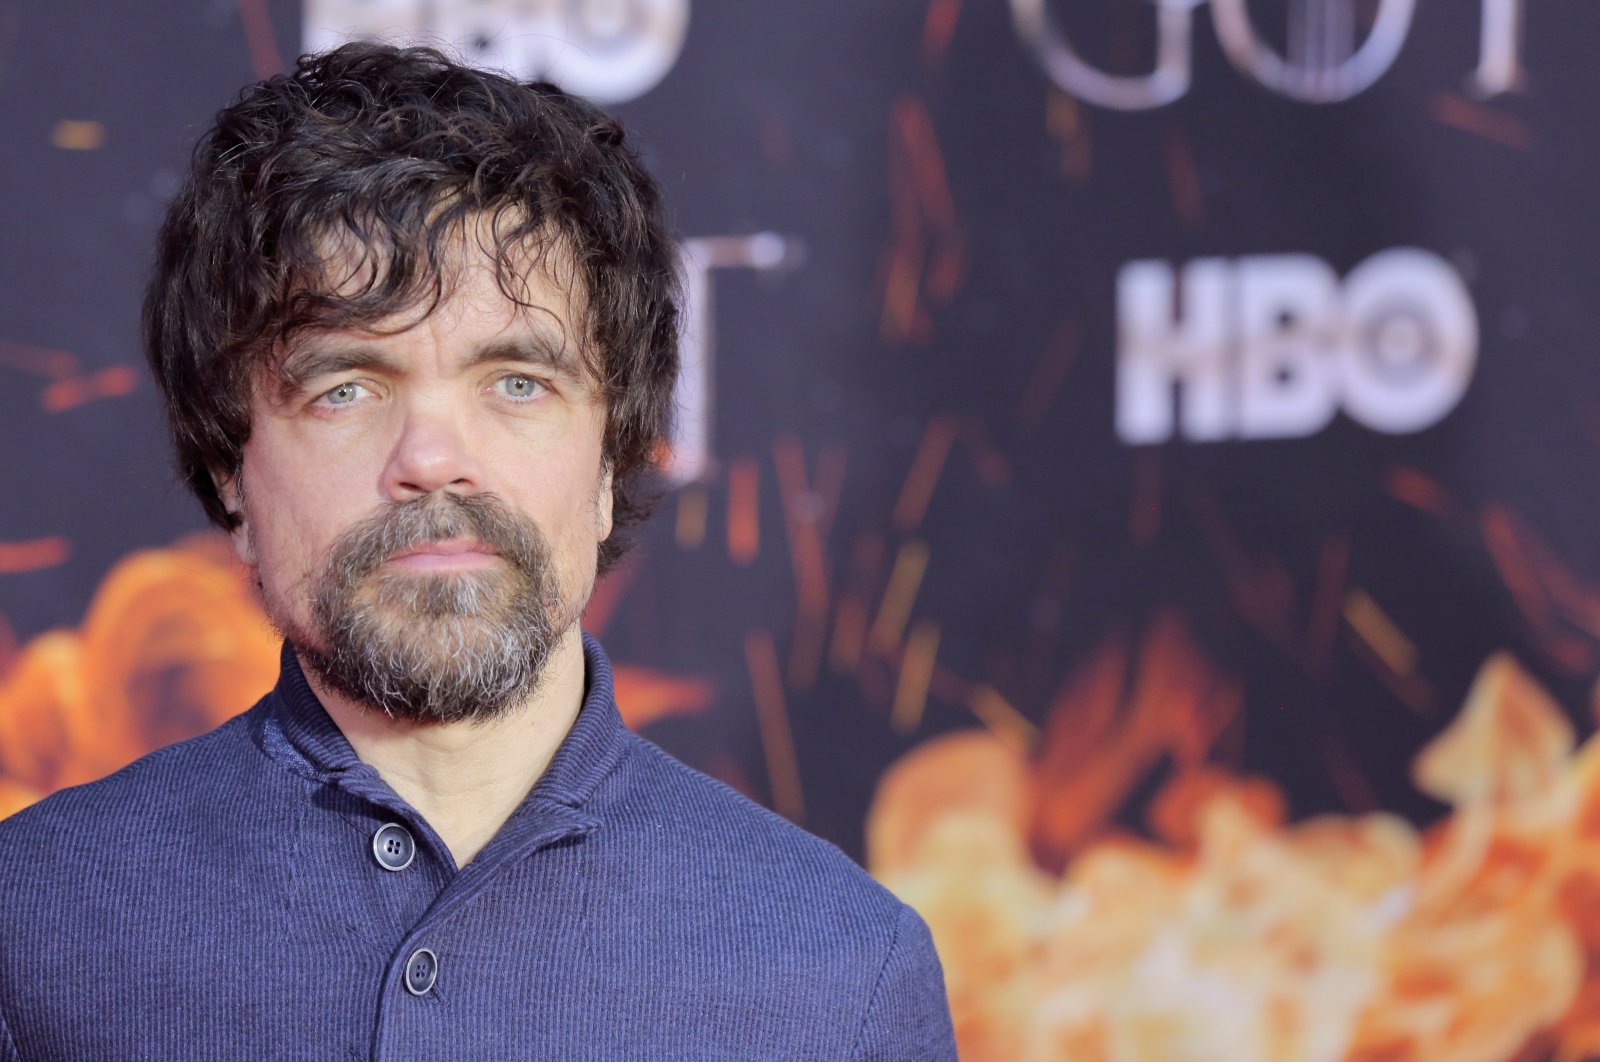 Peter Dinklage arrives for the premiere of the final season of &quot;Game of Thrones&quot; at Radio City Music Hall in New York, U.S., April 3, 2019. (REUTERS)